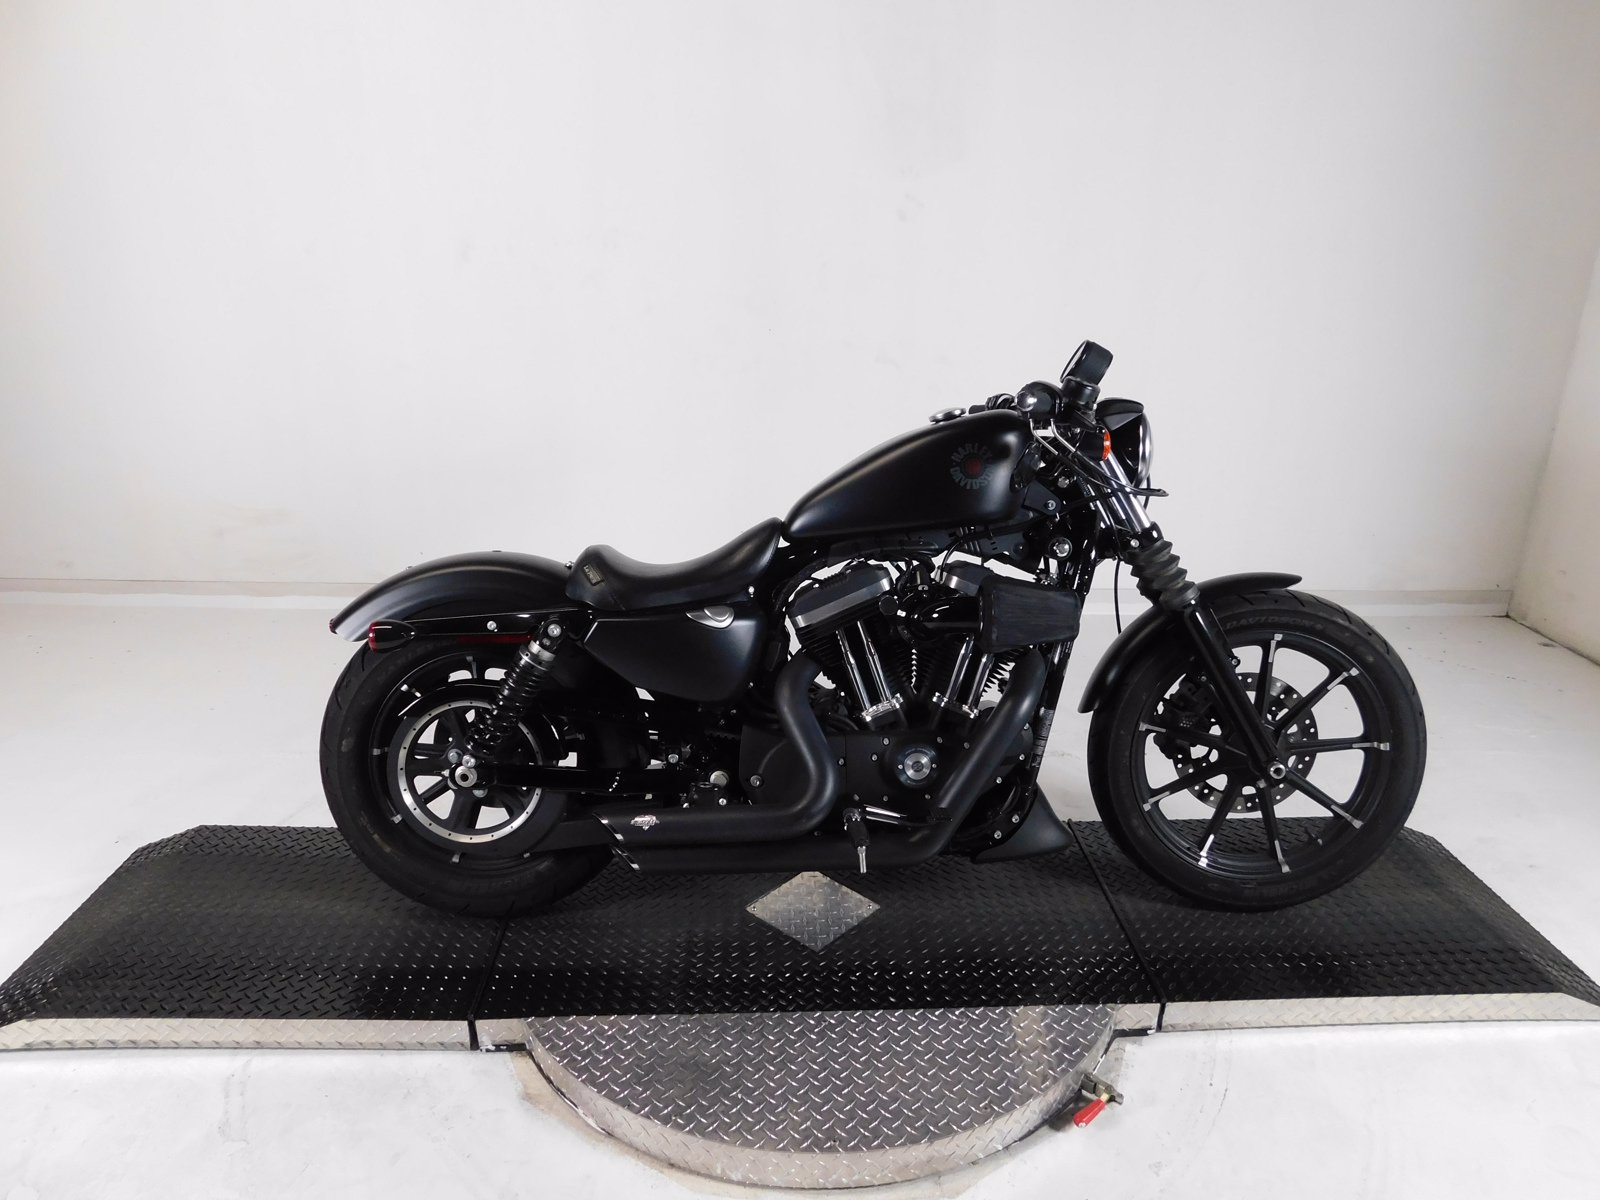 Pre-Owned 2019 Harley-Davidson Sportster Iron 883 XL883N ...